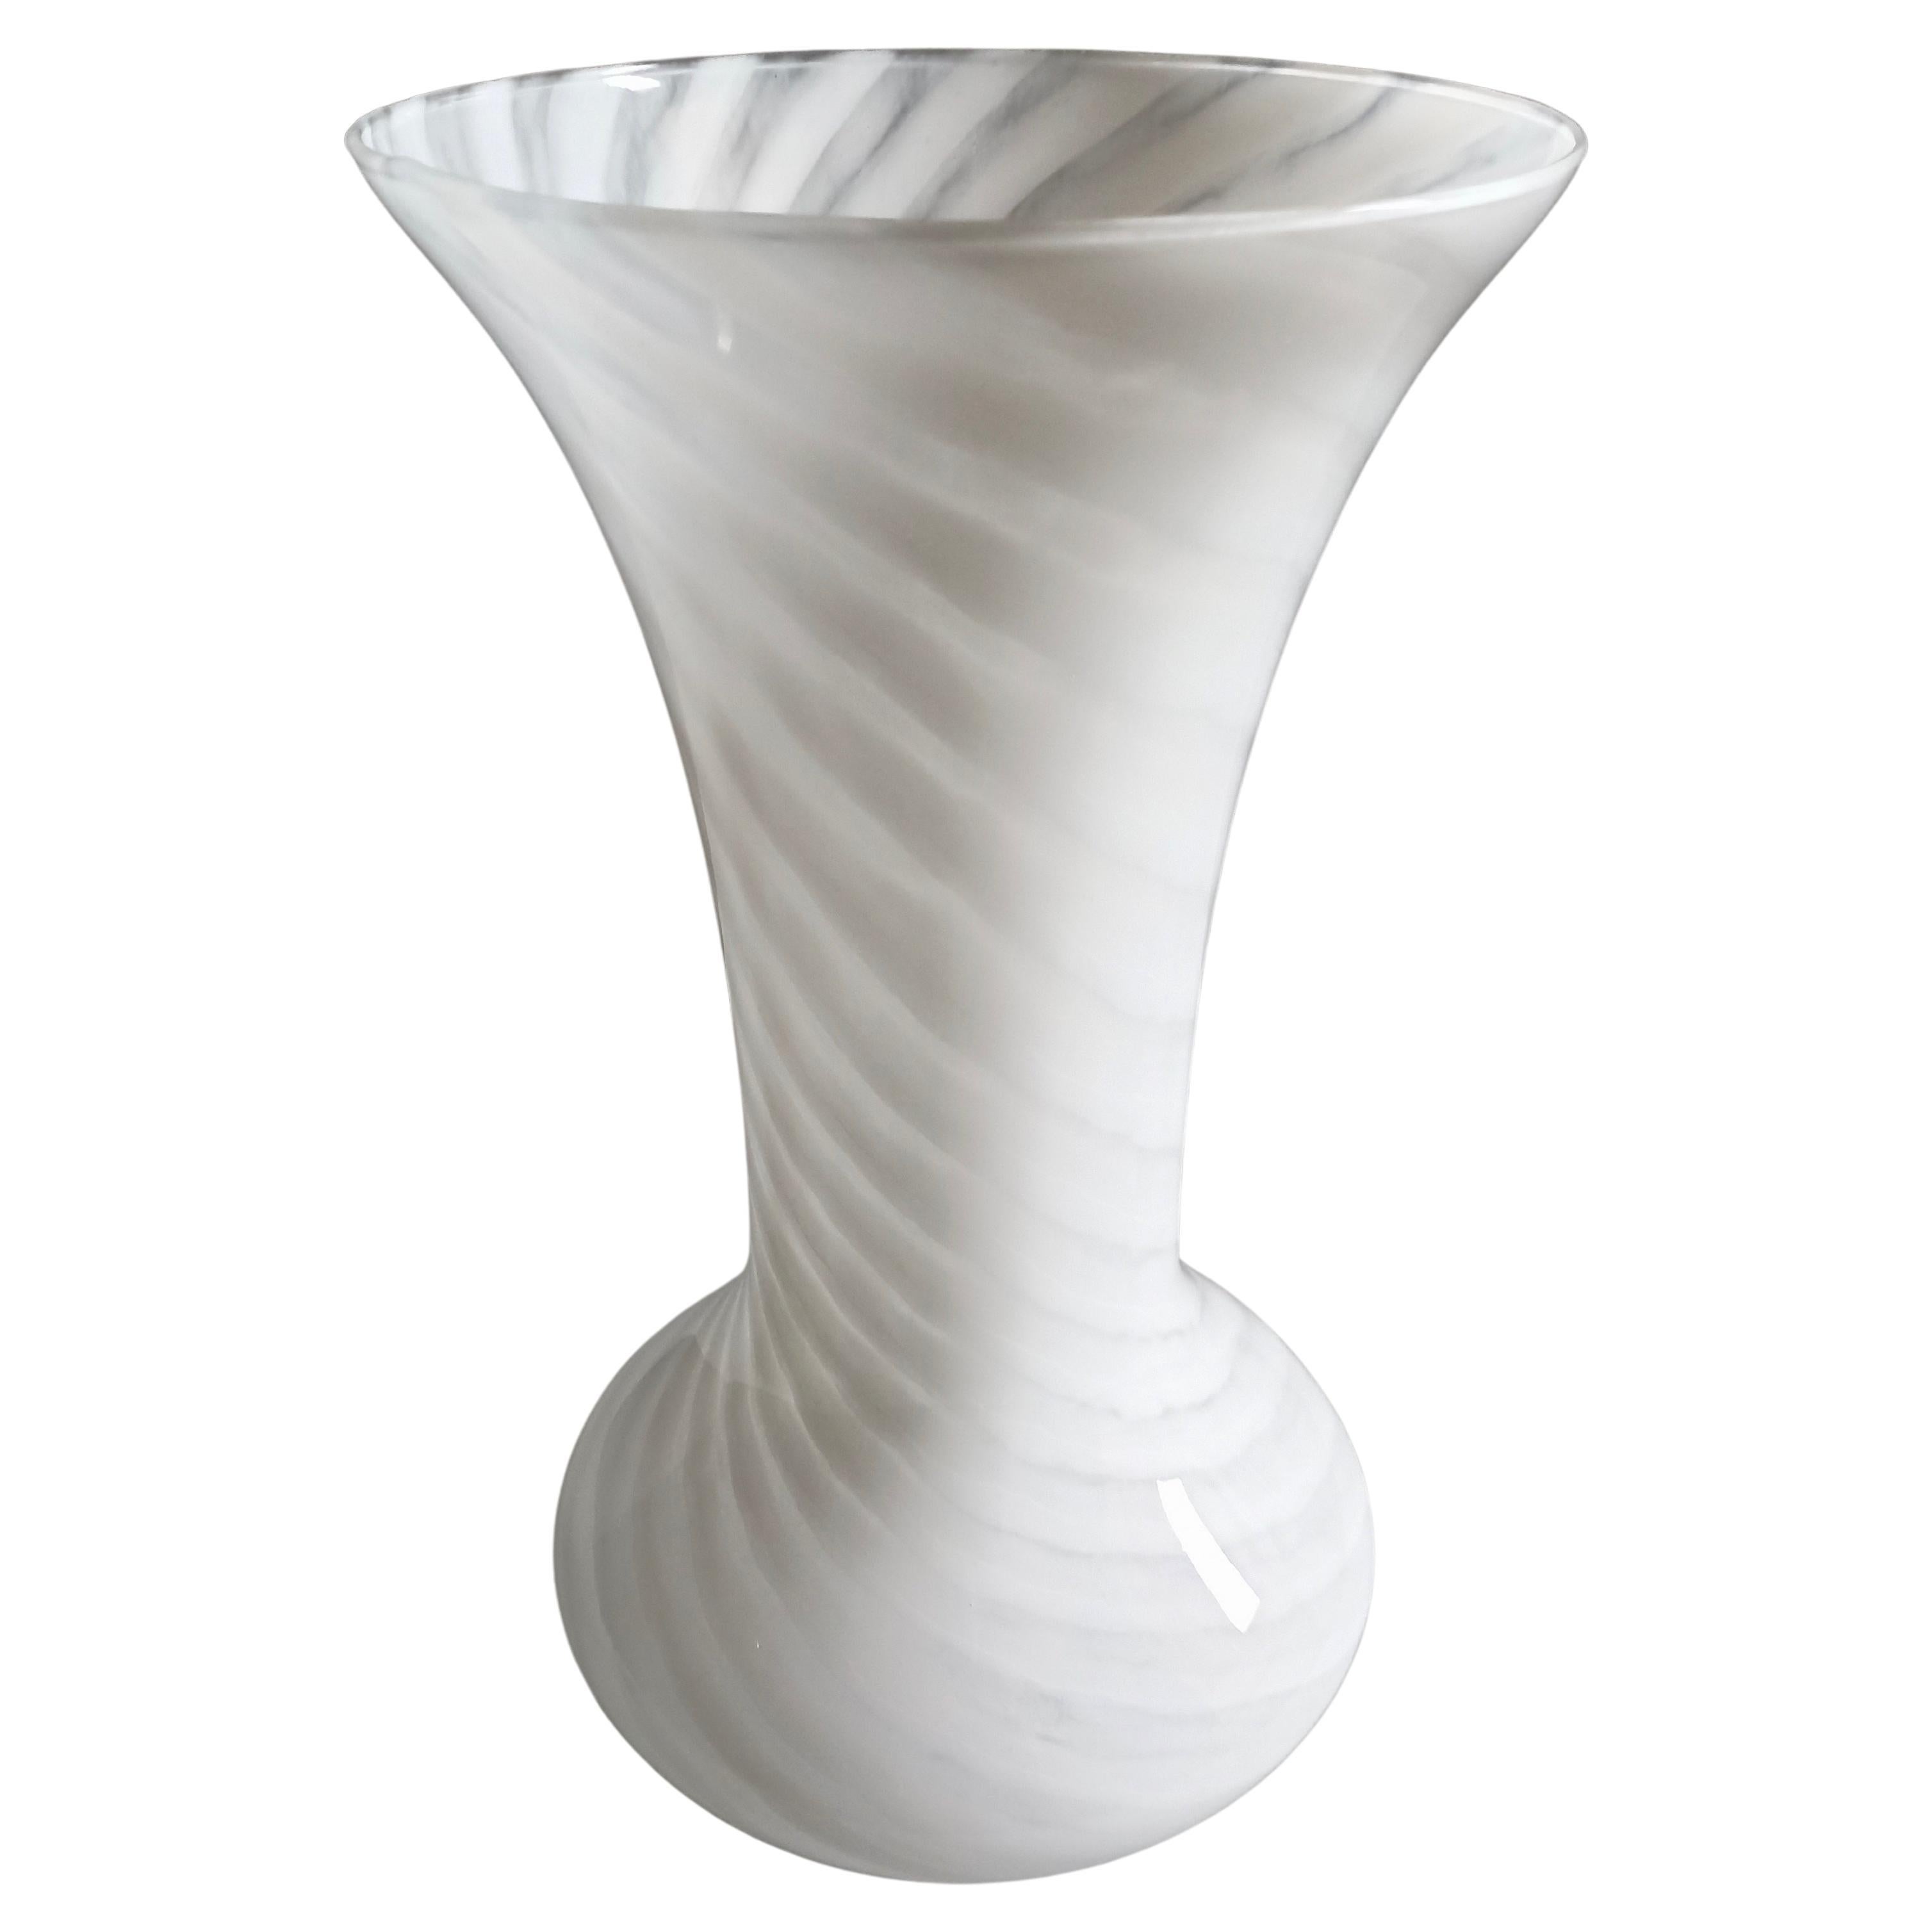 Large 1960s hand-blown swirled glass vase, clear glass base.  
Dimensions:
height: 37.5 cm/ 14.80 in
upper diameter: 19.5 cm/ 7.68 in
max. bottom diameter: 19 cm/ 7.48 in
weight: 1.9 kg
When shipping, we carefully protect your purchases, with the